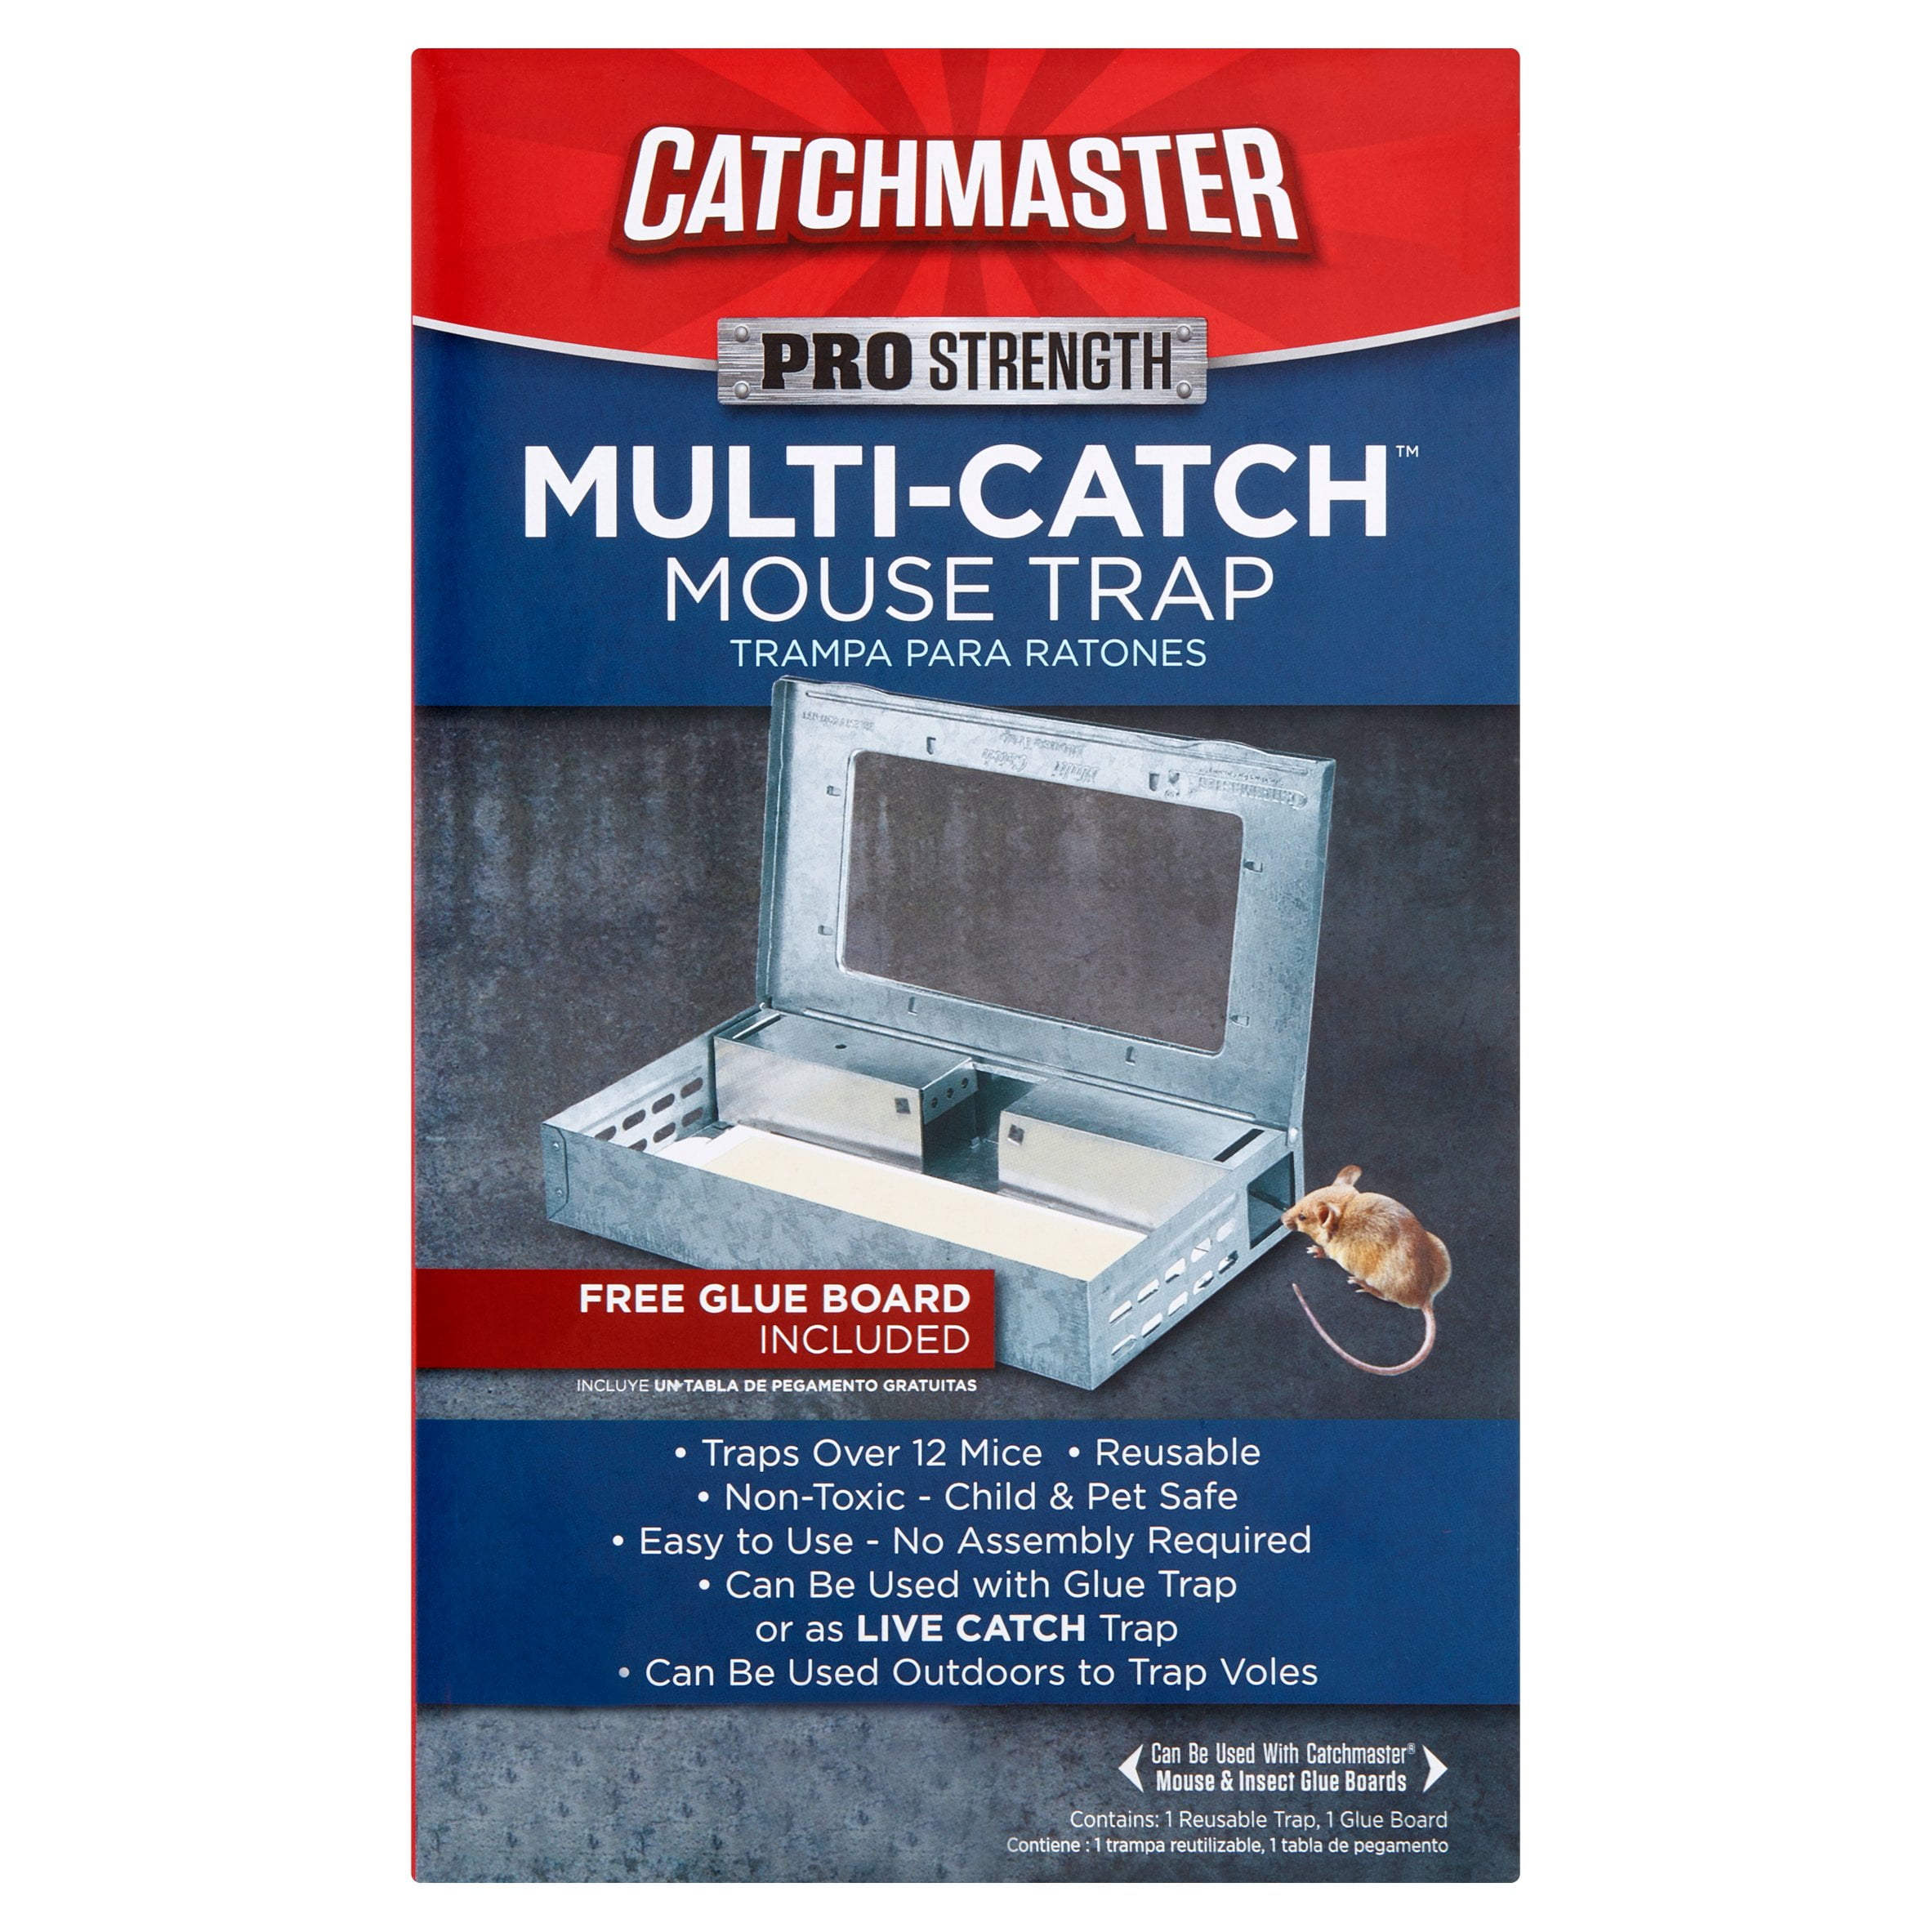 Catch A Mouse Fast: What Makes the Best Mouse Trap Bait? - Synergy²